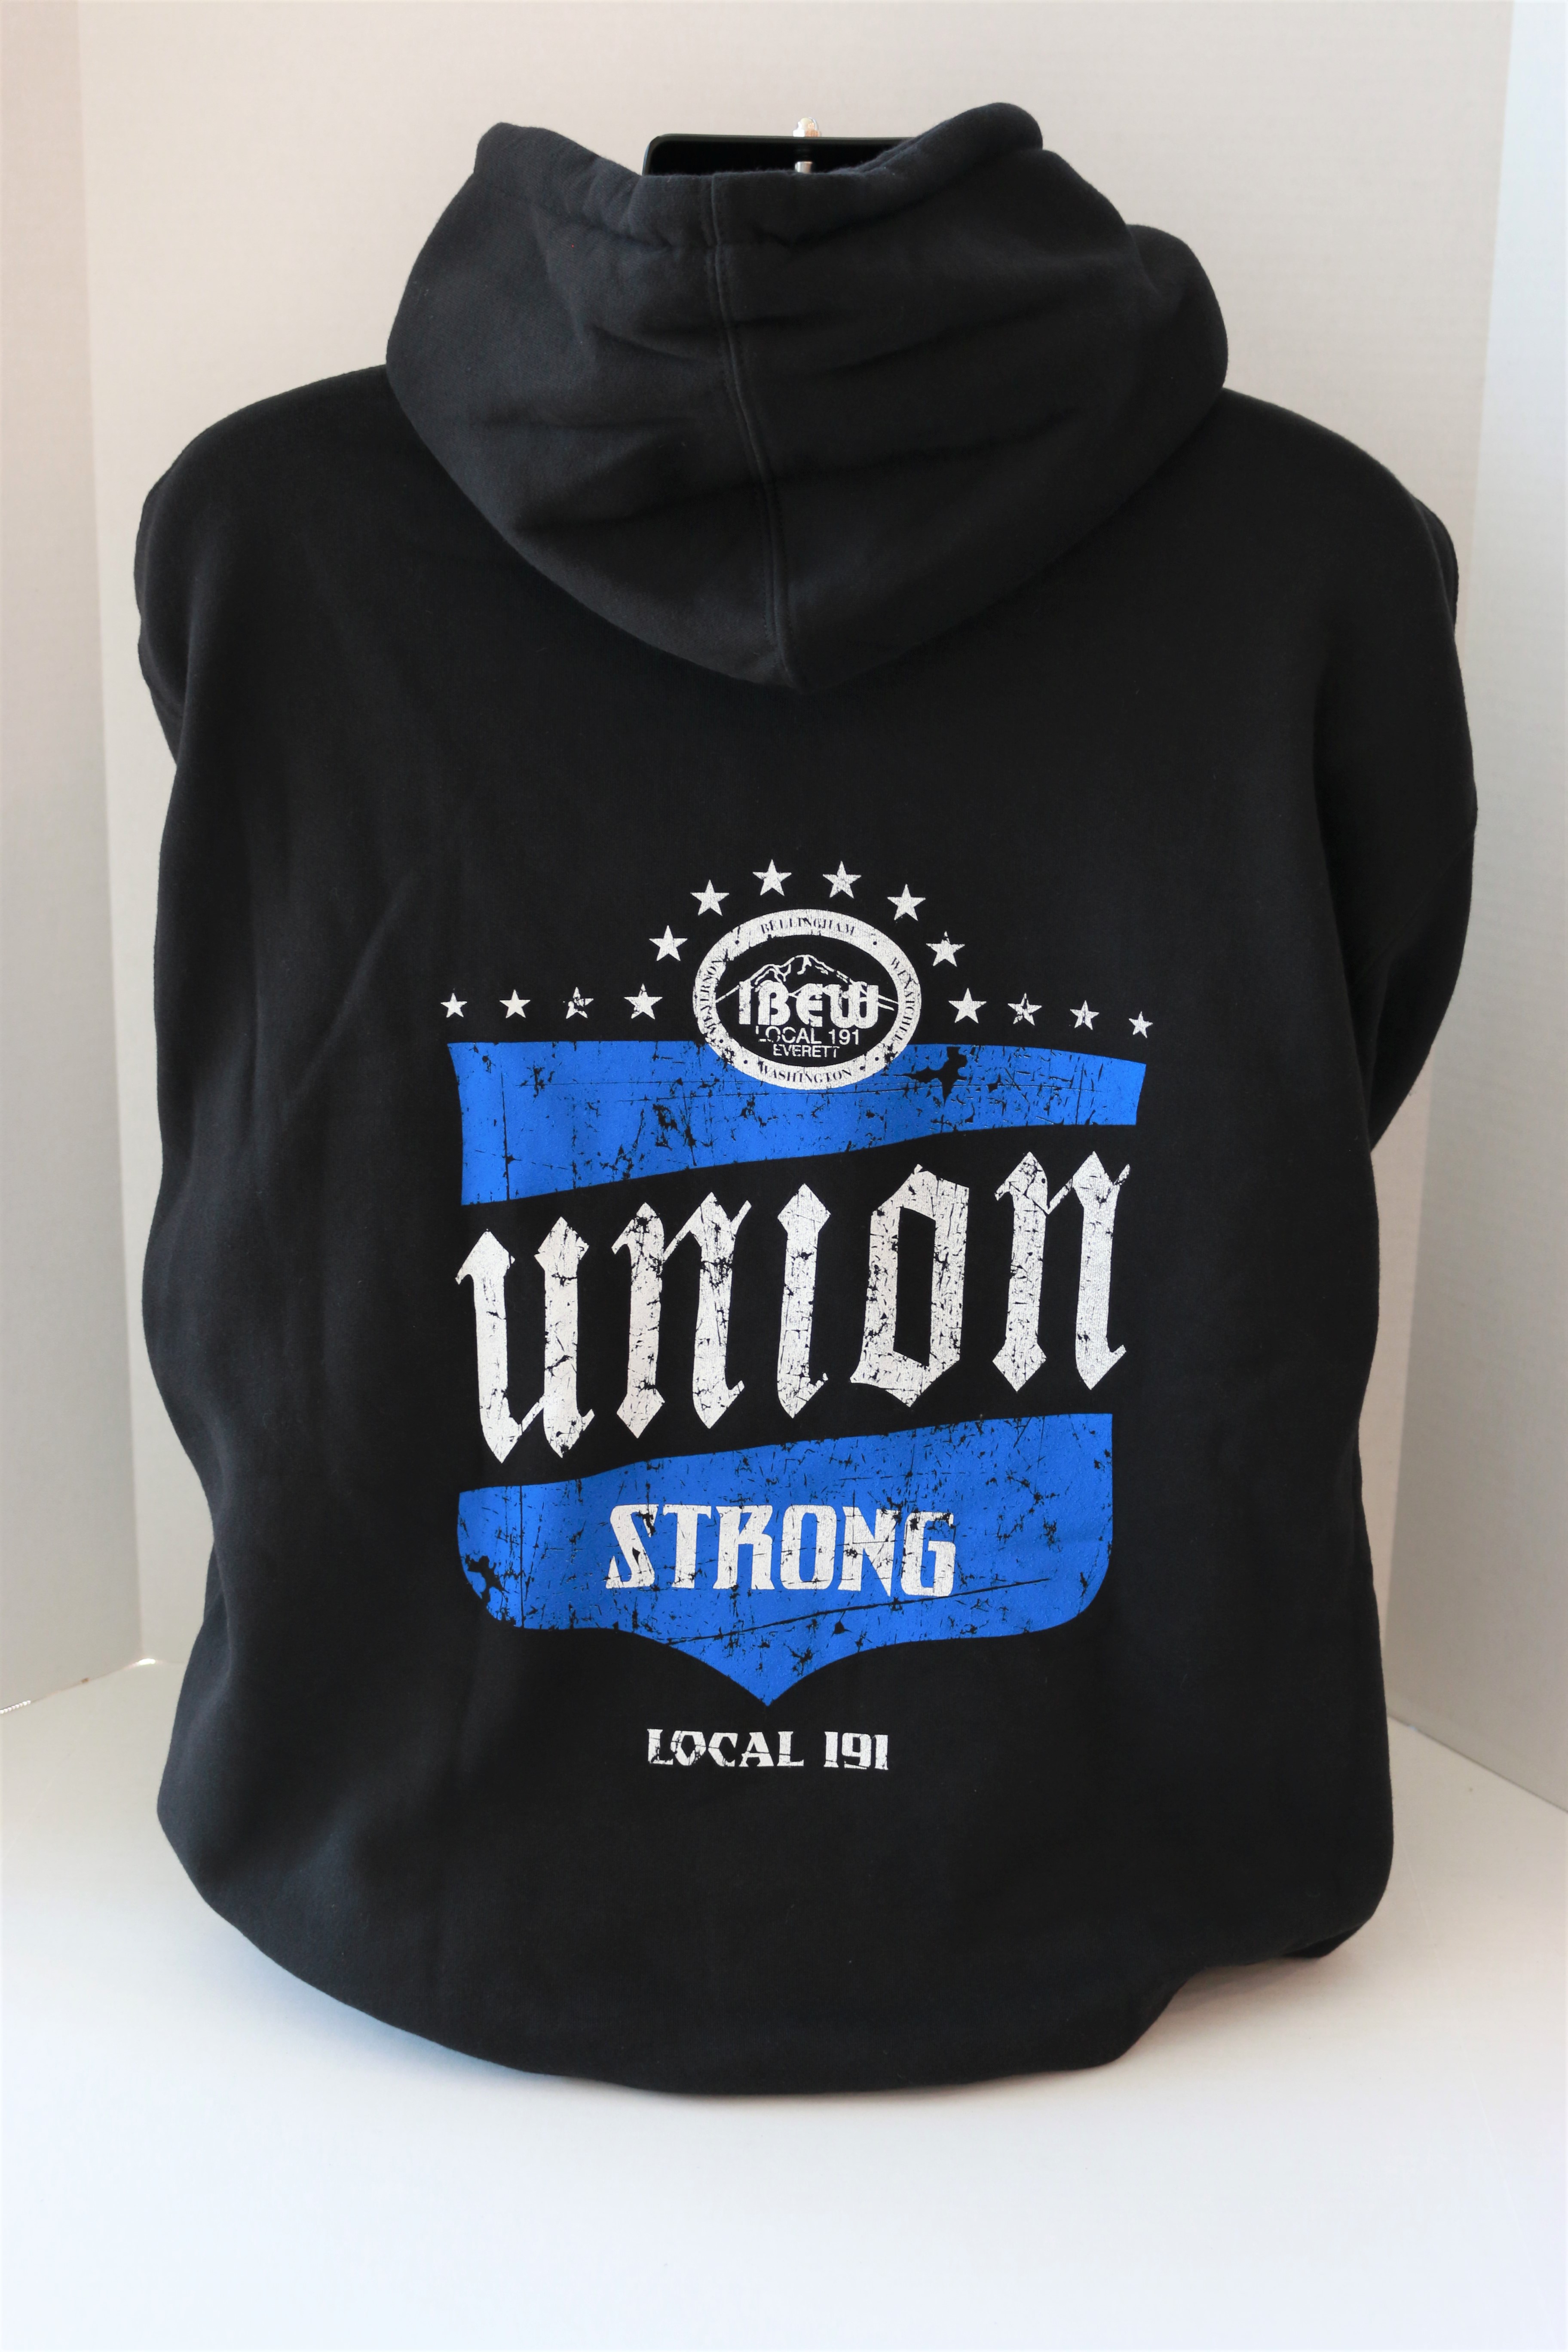 SALE: Black Union Strong Hoodie